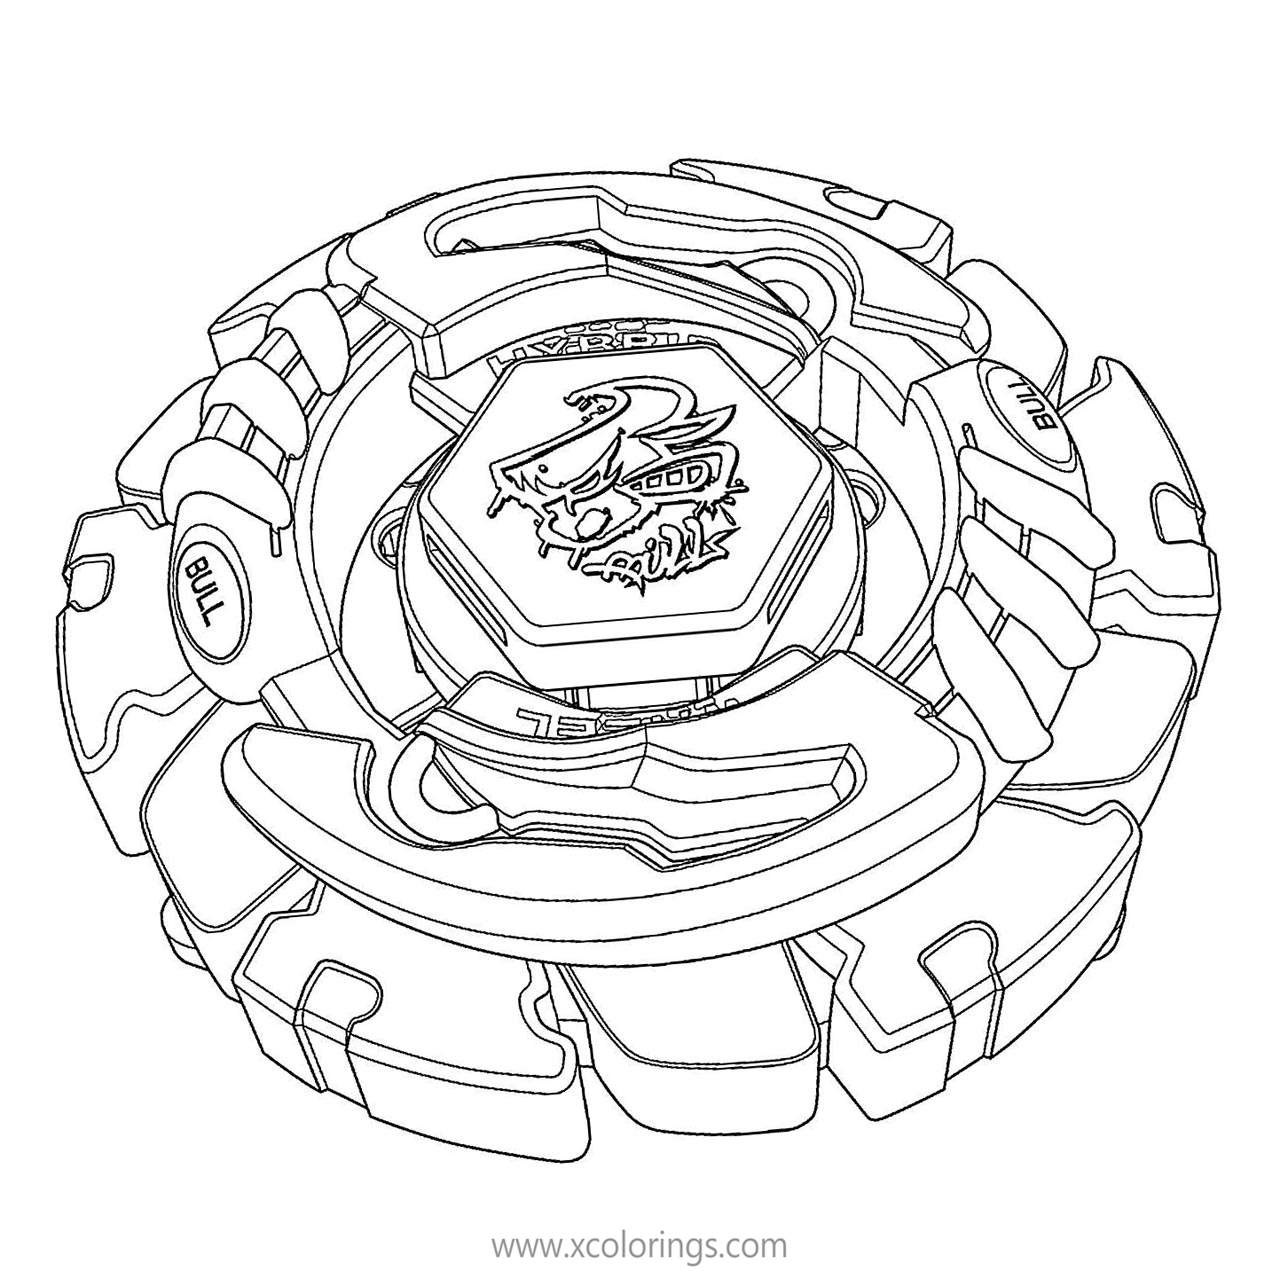 Free Bull Beyblade Coloring Pages printable